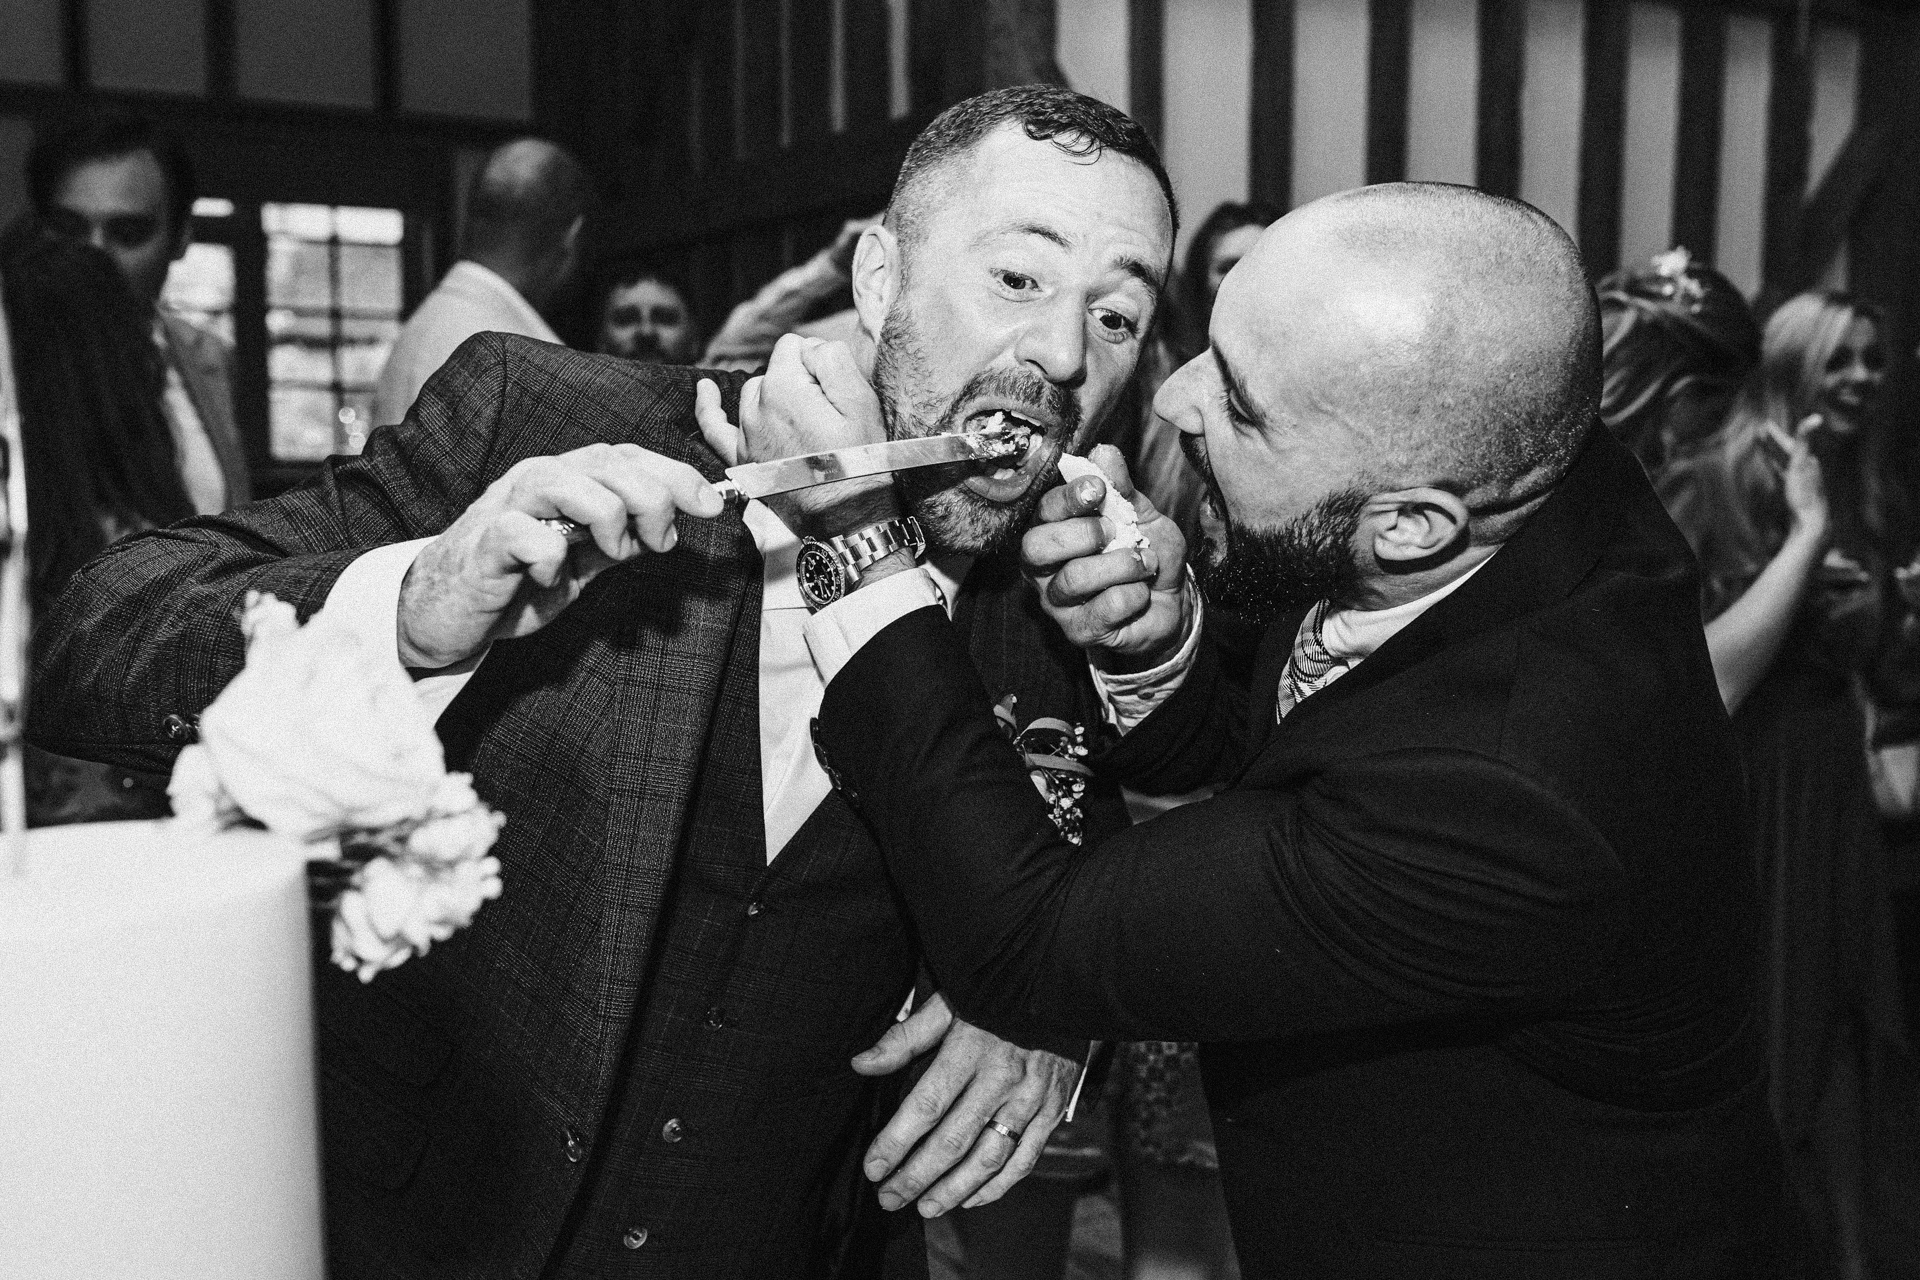 Wedding cake is devoured by groom and his friends